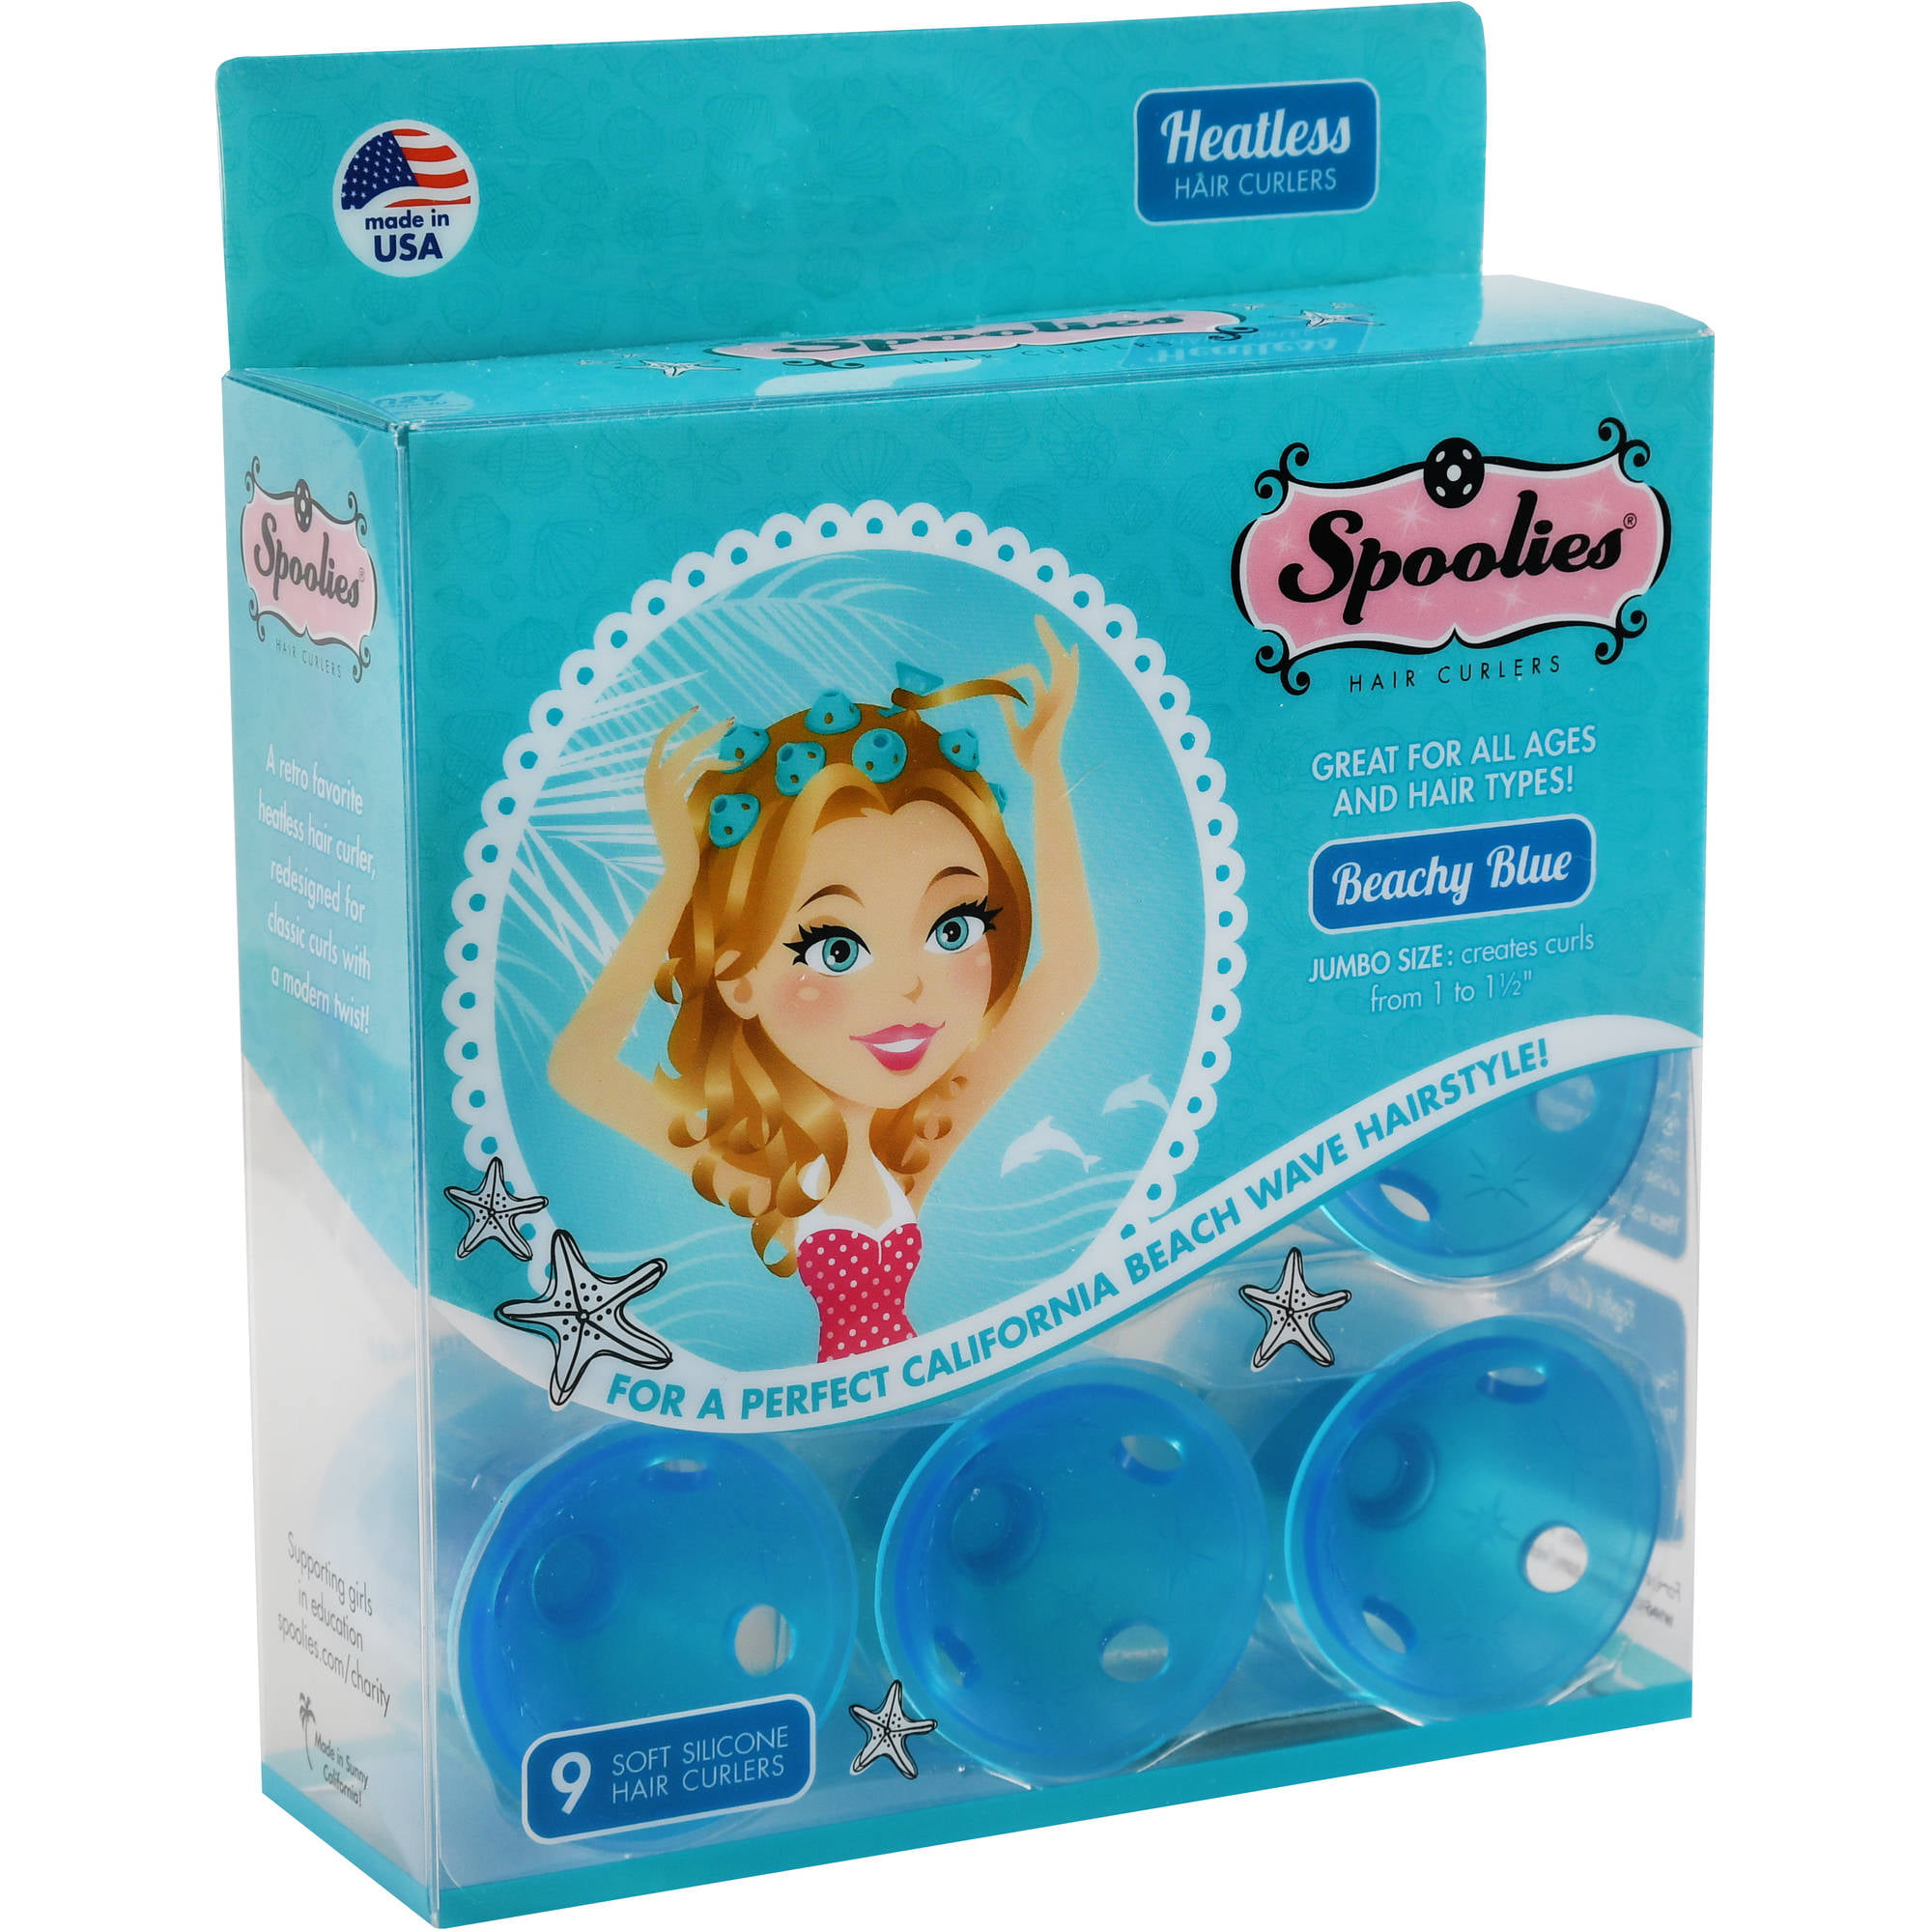 Magic Hair Rollers Spoolies Discount, 58% OFF 